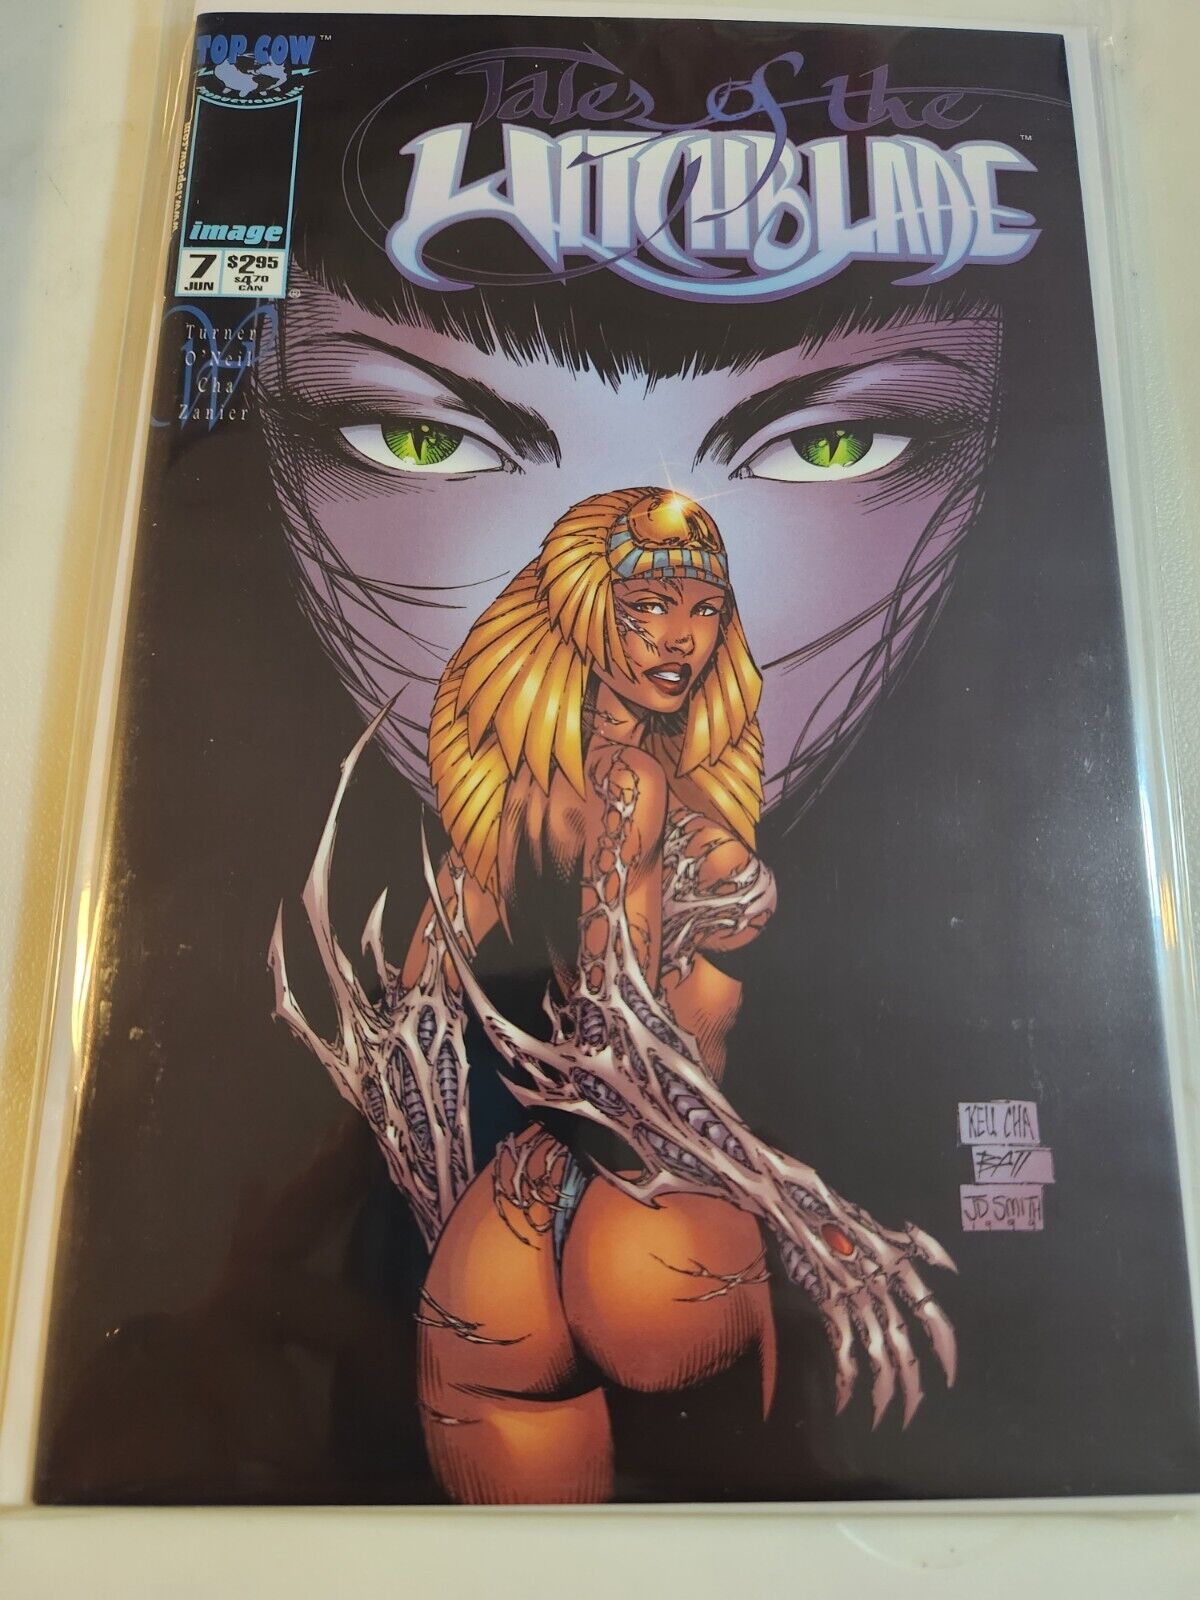 Tales Of The Witchblade #7 1999 IMAGE COMIC BOOK 9.6 V24-152